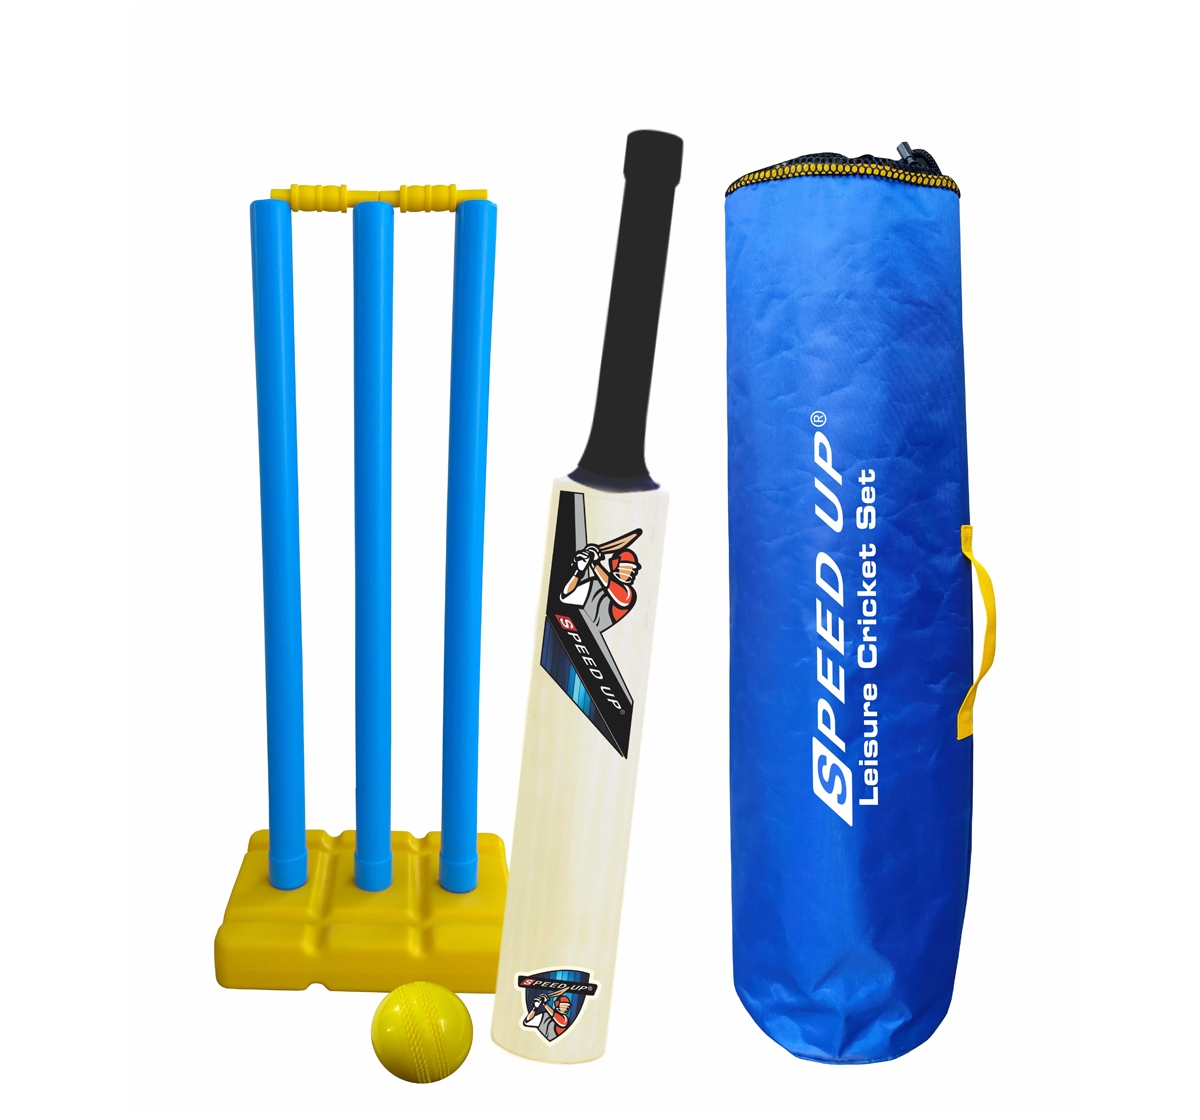 Speed Up | Speed Up Leisure Cricket Set Kids Toy Multicolour 8Y+